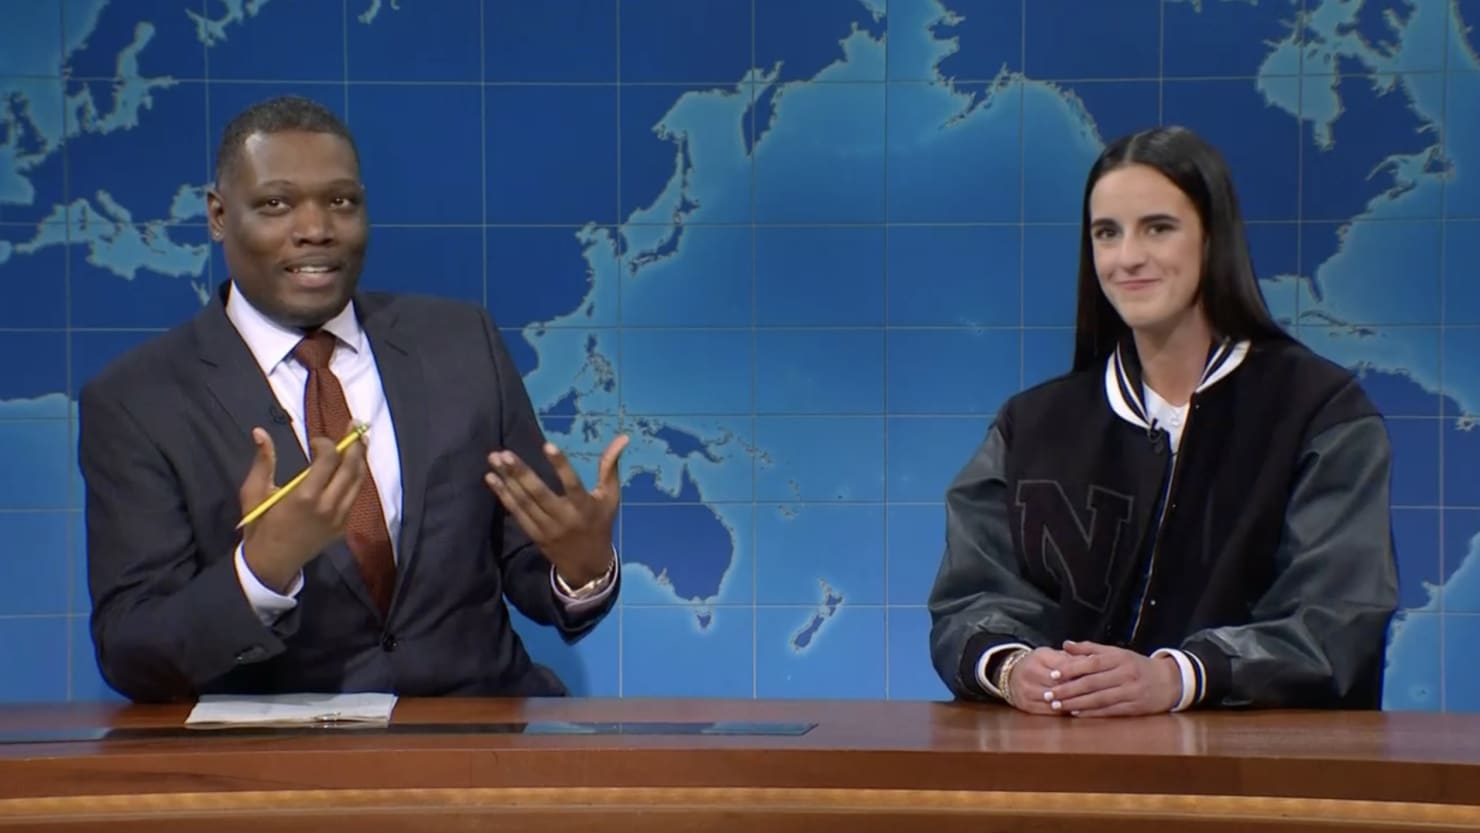 Caitlin Clark Makes Surprise Appearance on ‘SNL’ to Call Out Michael Che’s Disparaging Remarks Against Women’s Sports